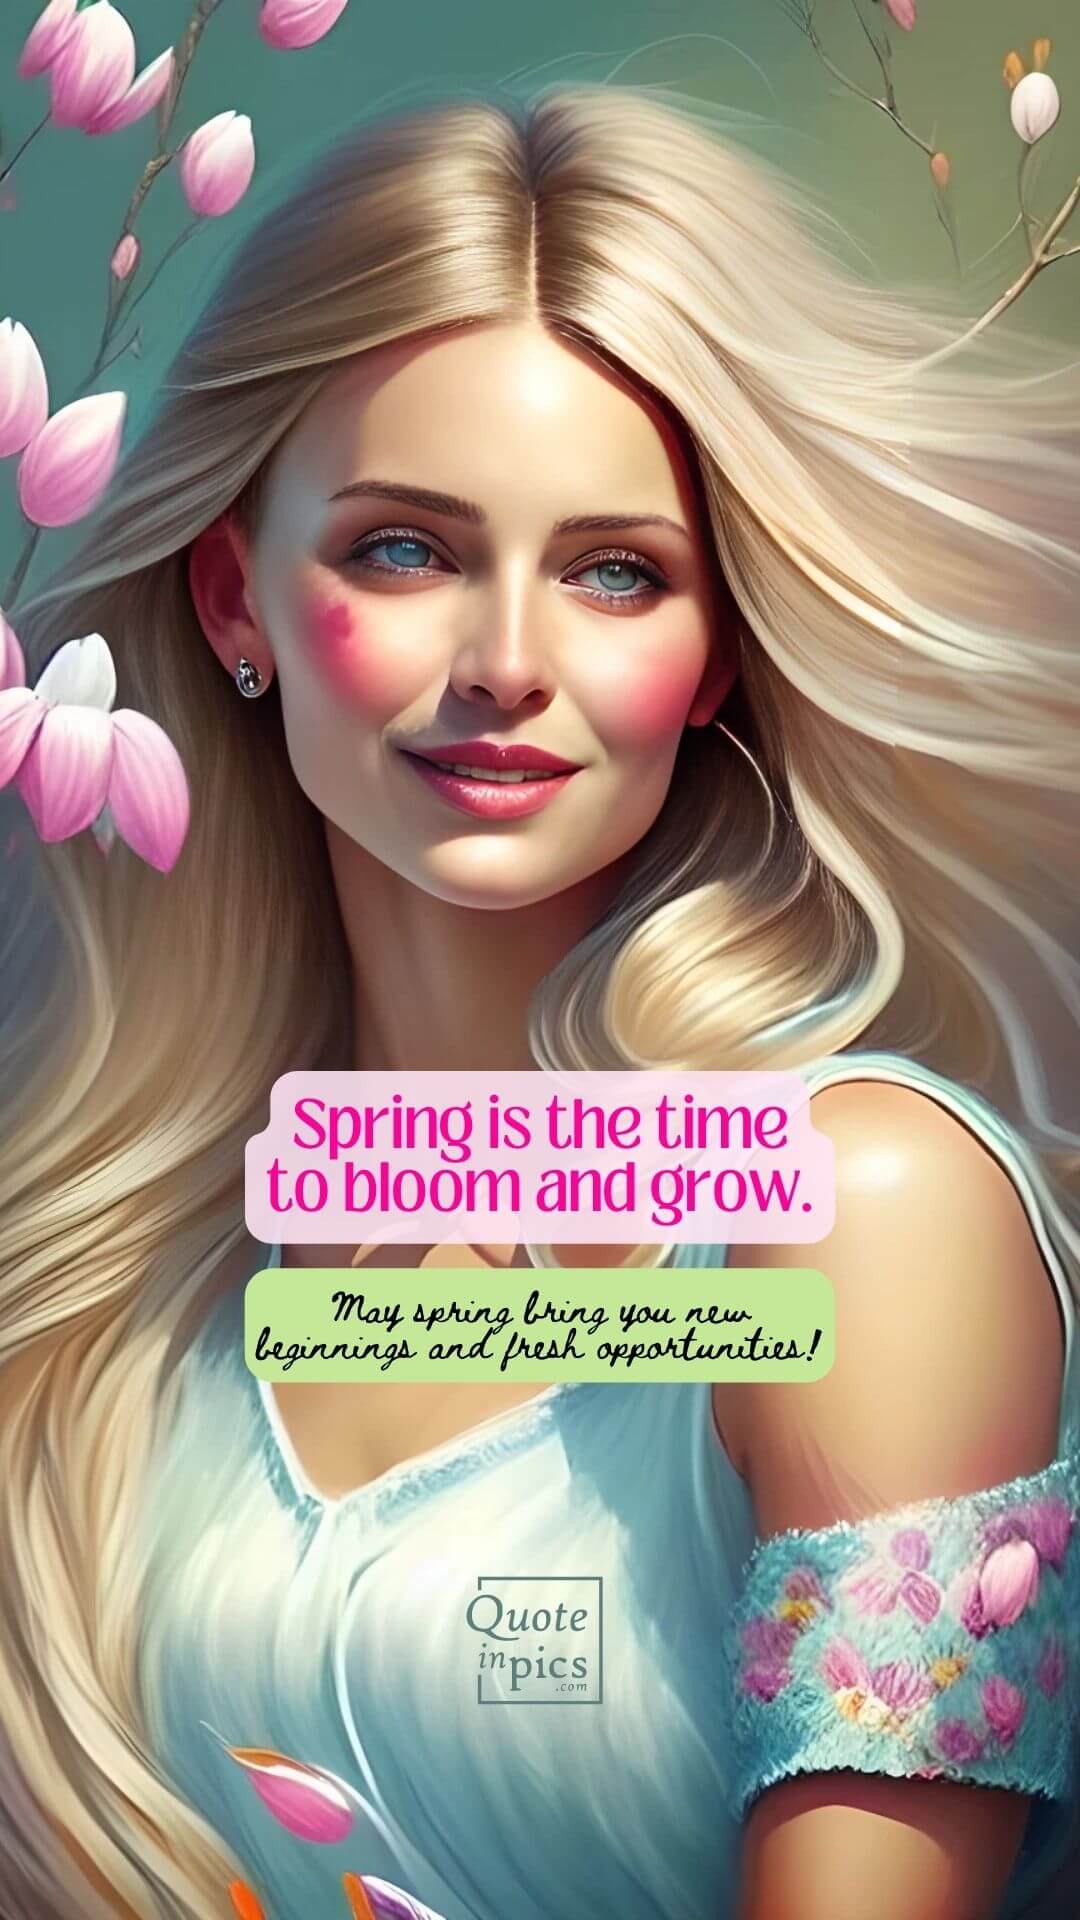 Spring is the time to bloom and grow